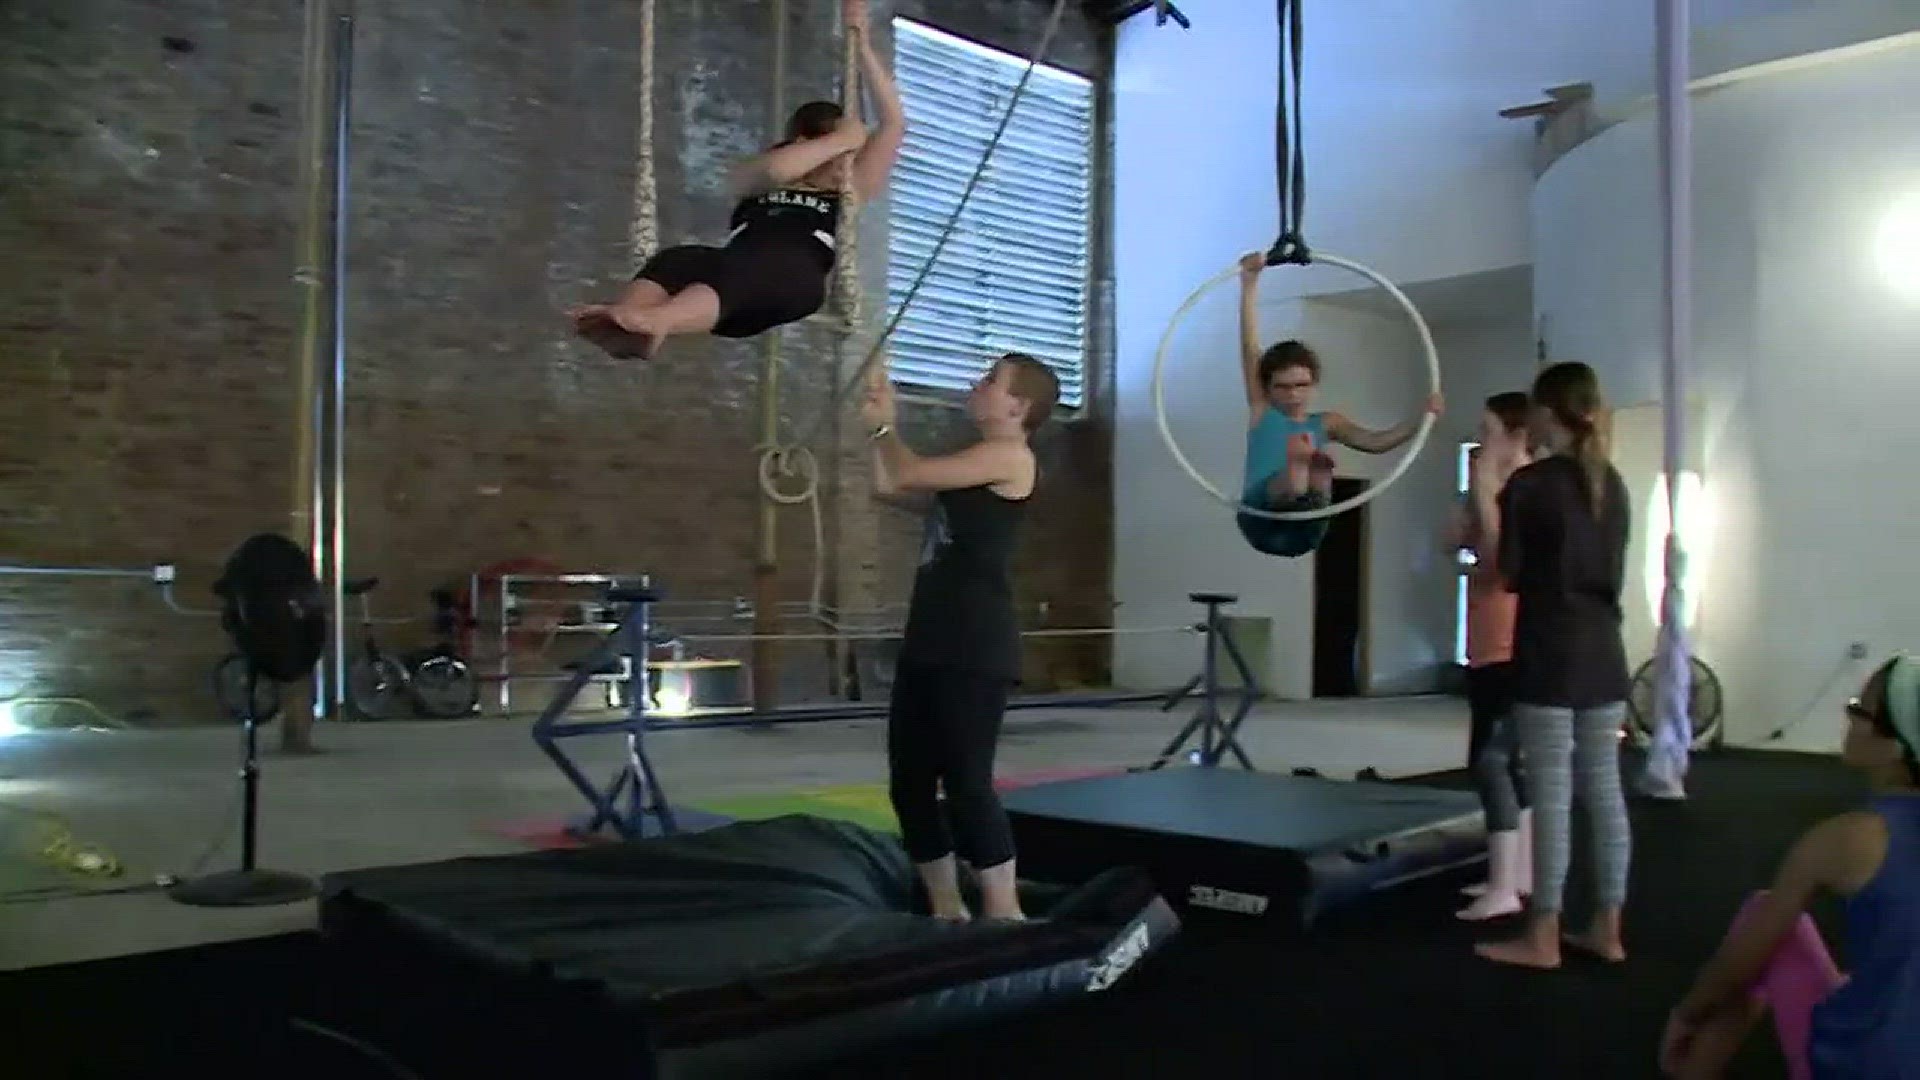 Why not join the circus? Kevin Belton shows us what it takes at New Orleans' Fly Circus Space.